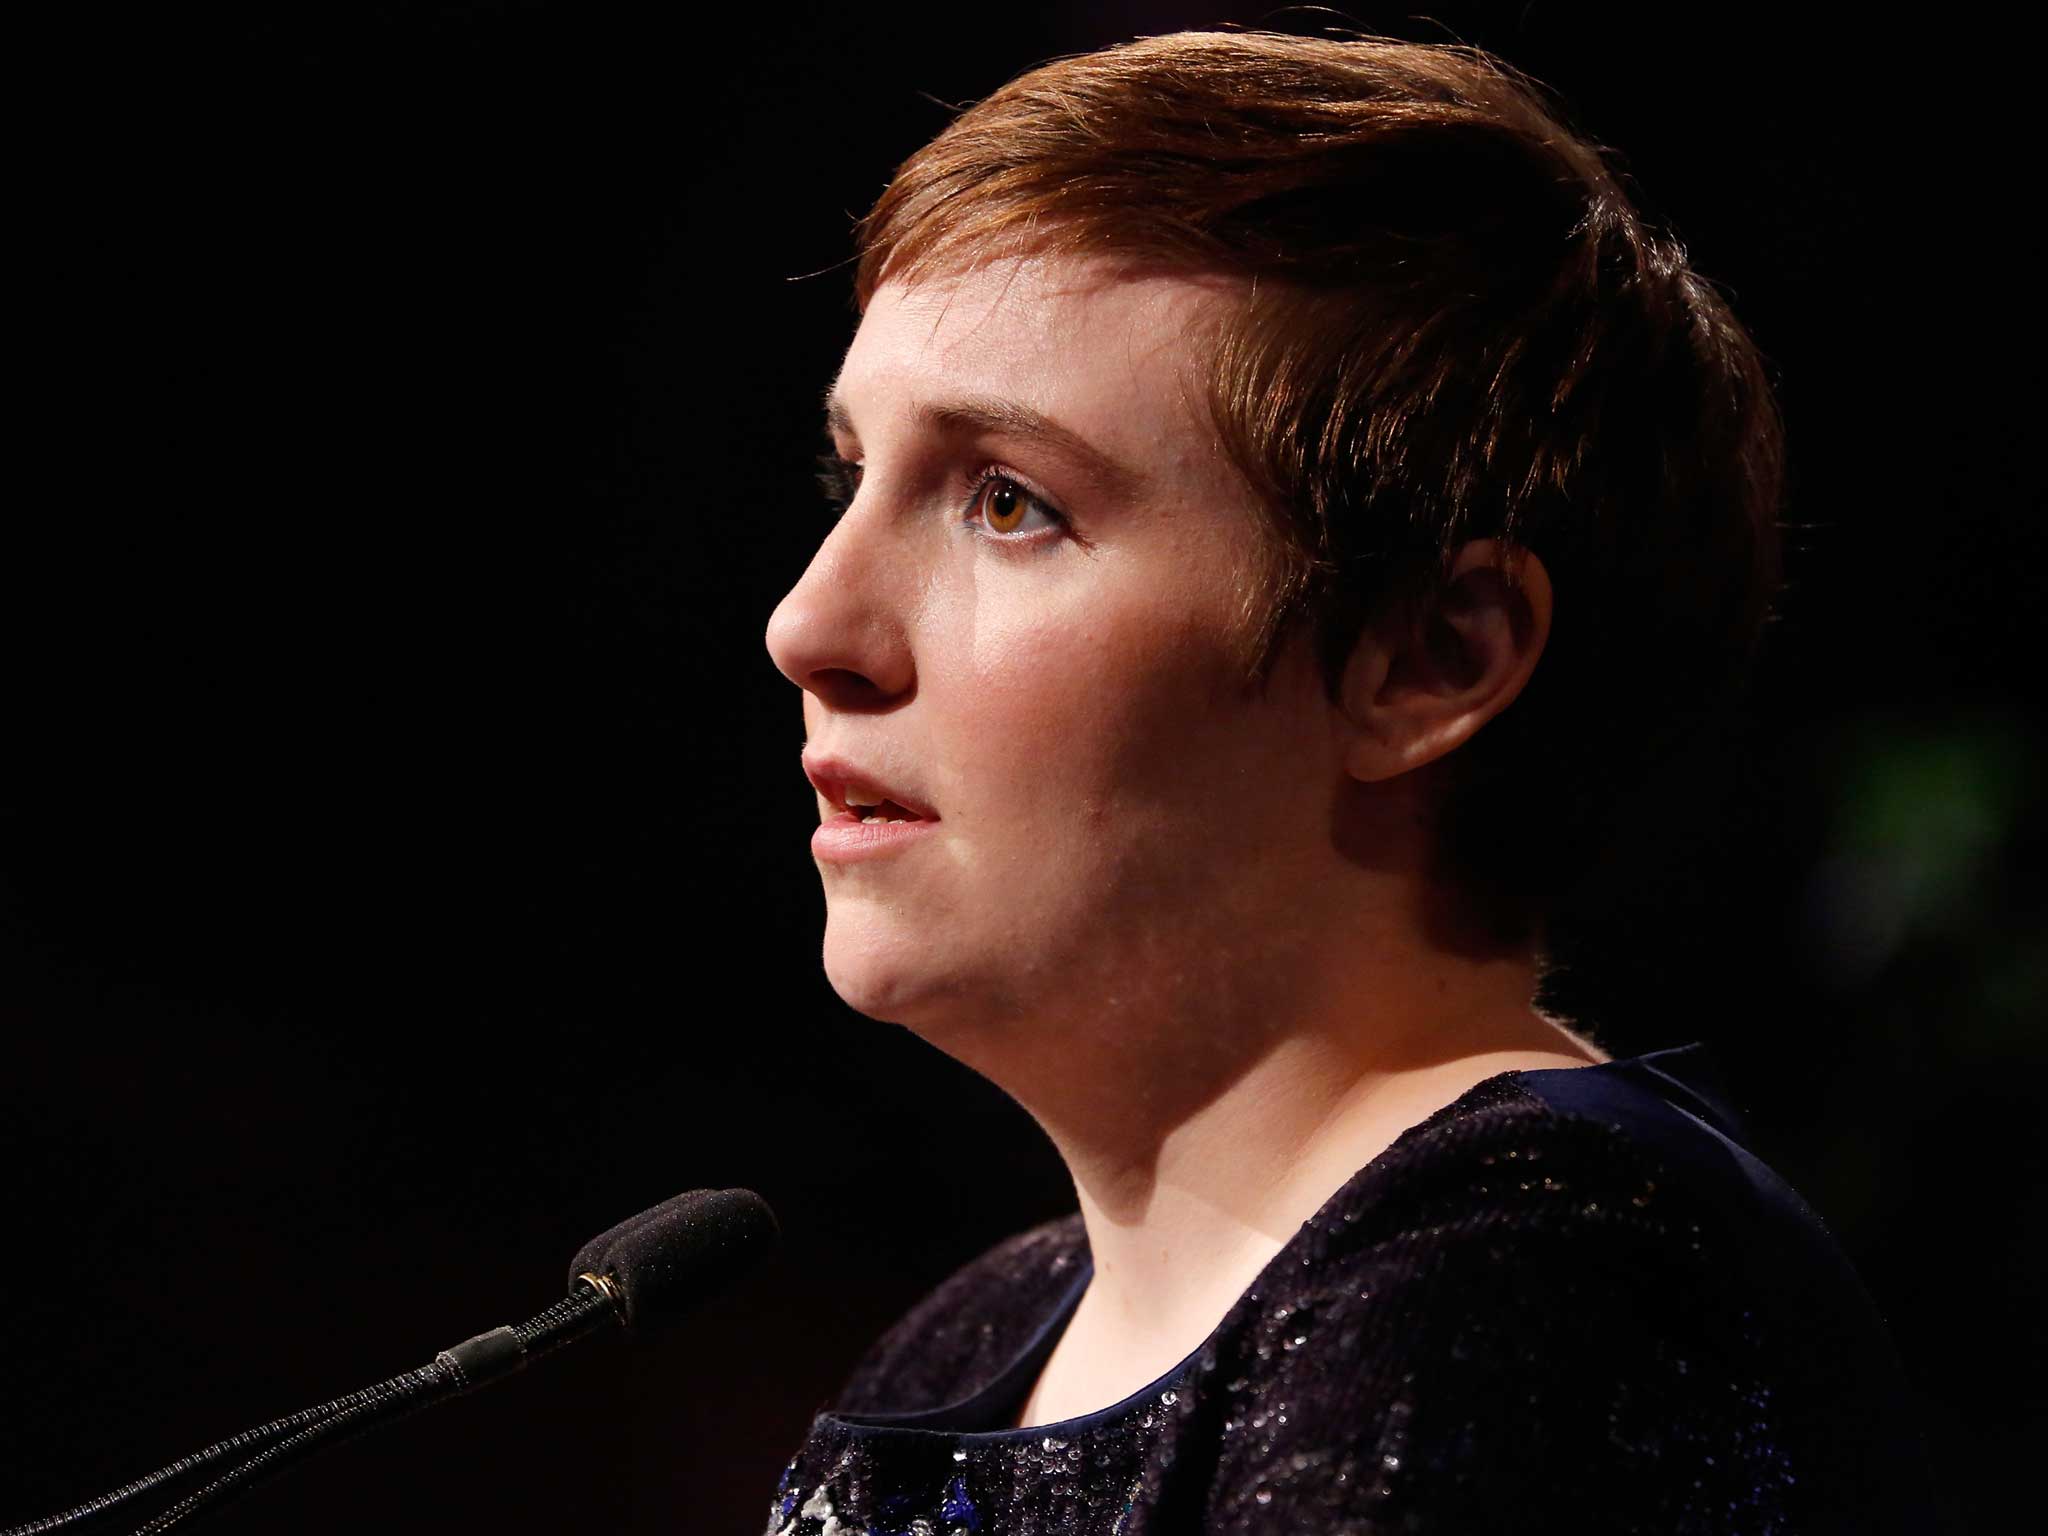 Dunham speaking at Variety's Power of Women conference